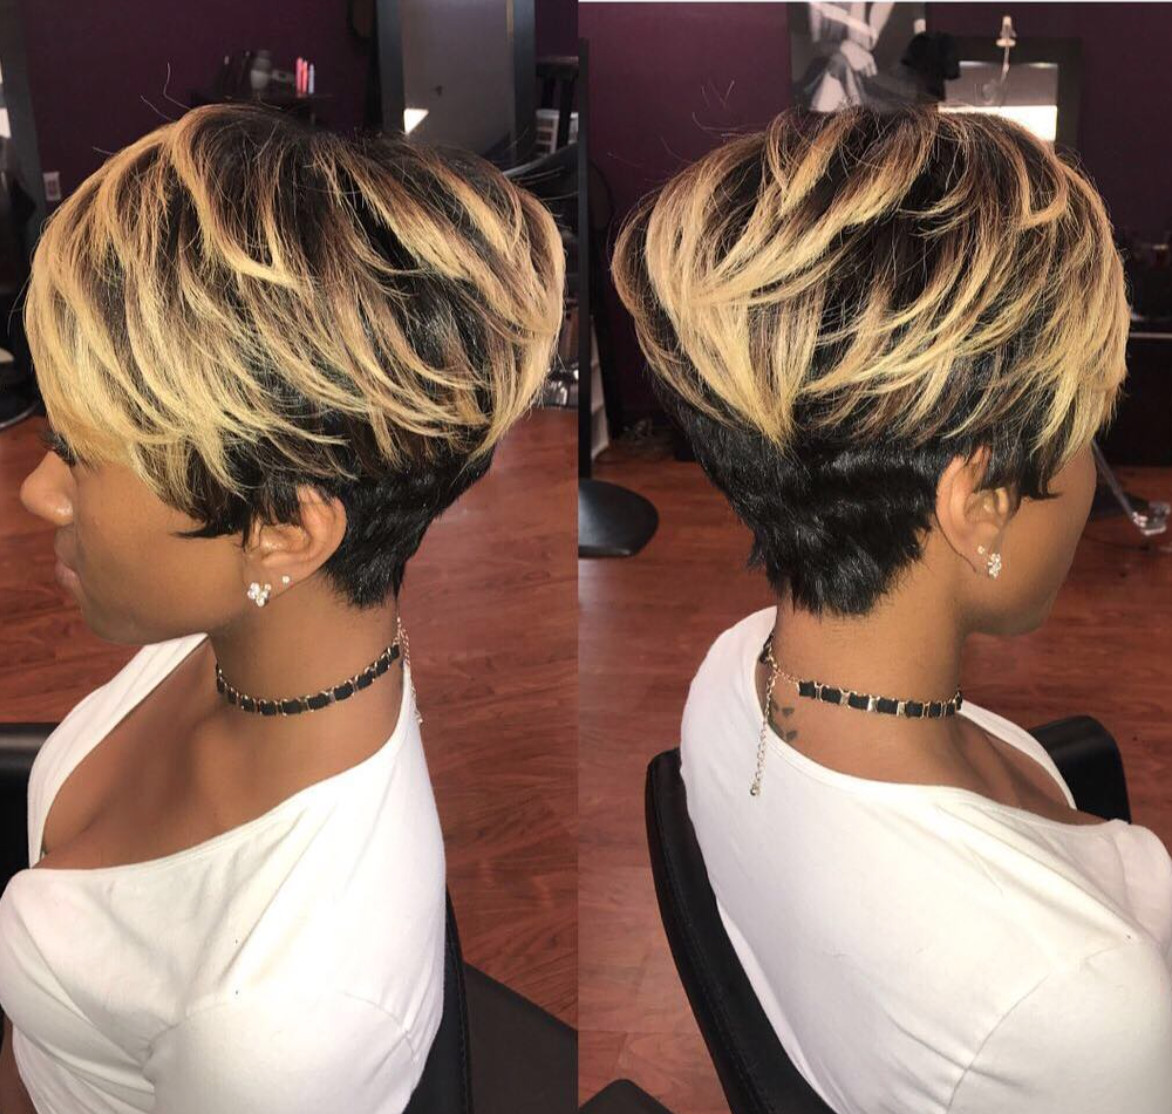 Cute Quick Weave Hairstyles
 Pin by Cathy Williams Easley on Hair and Beauty in 2019